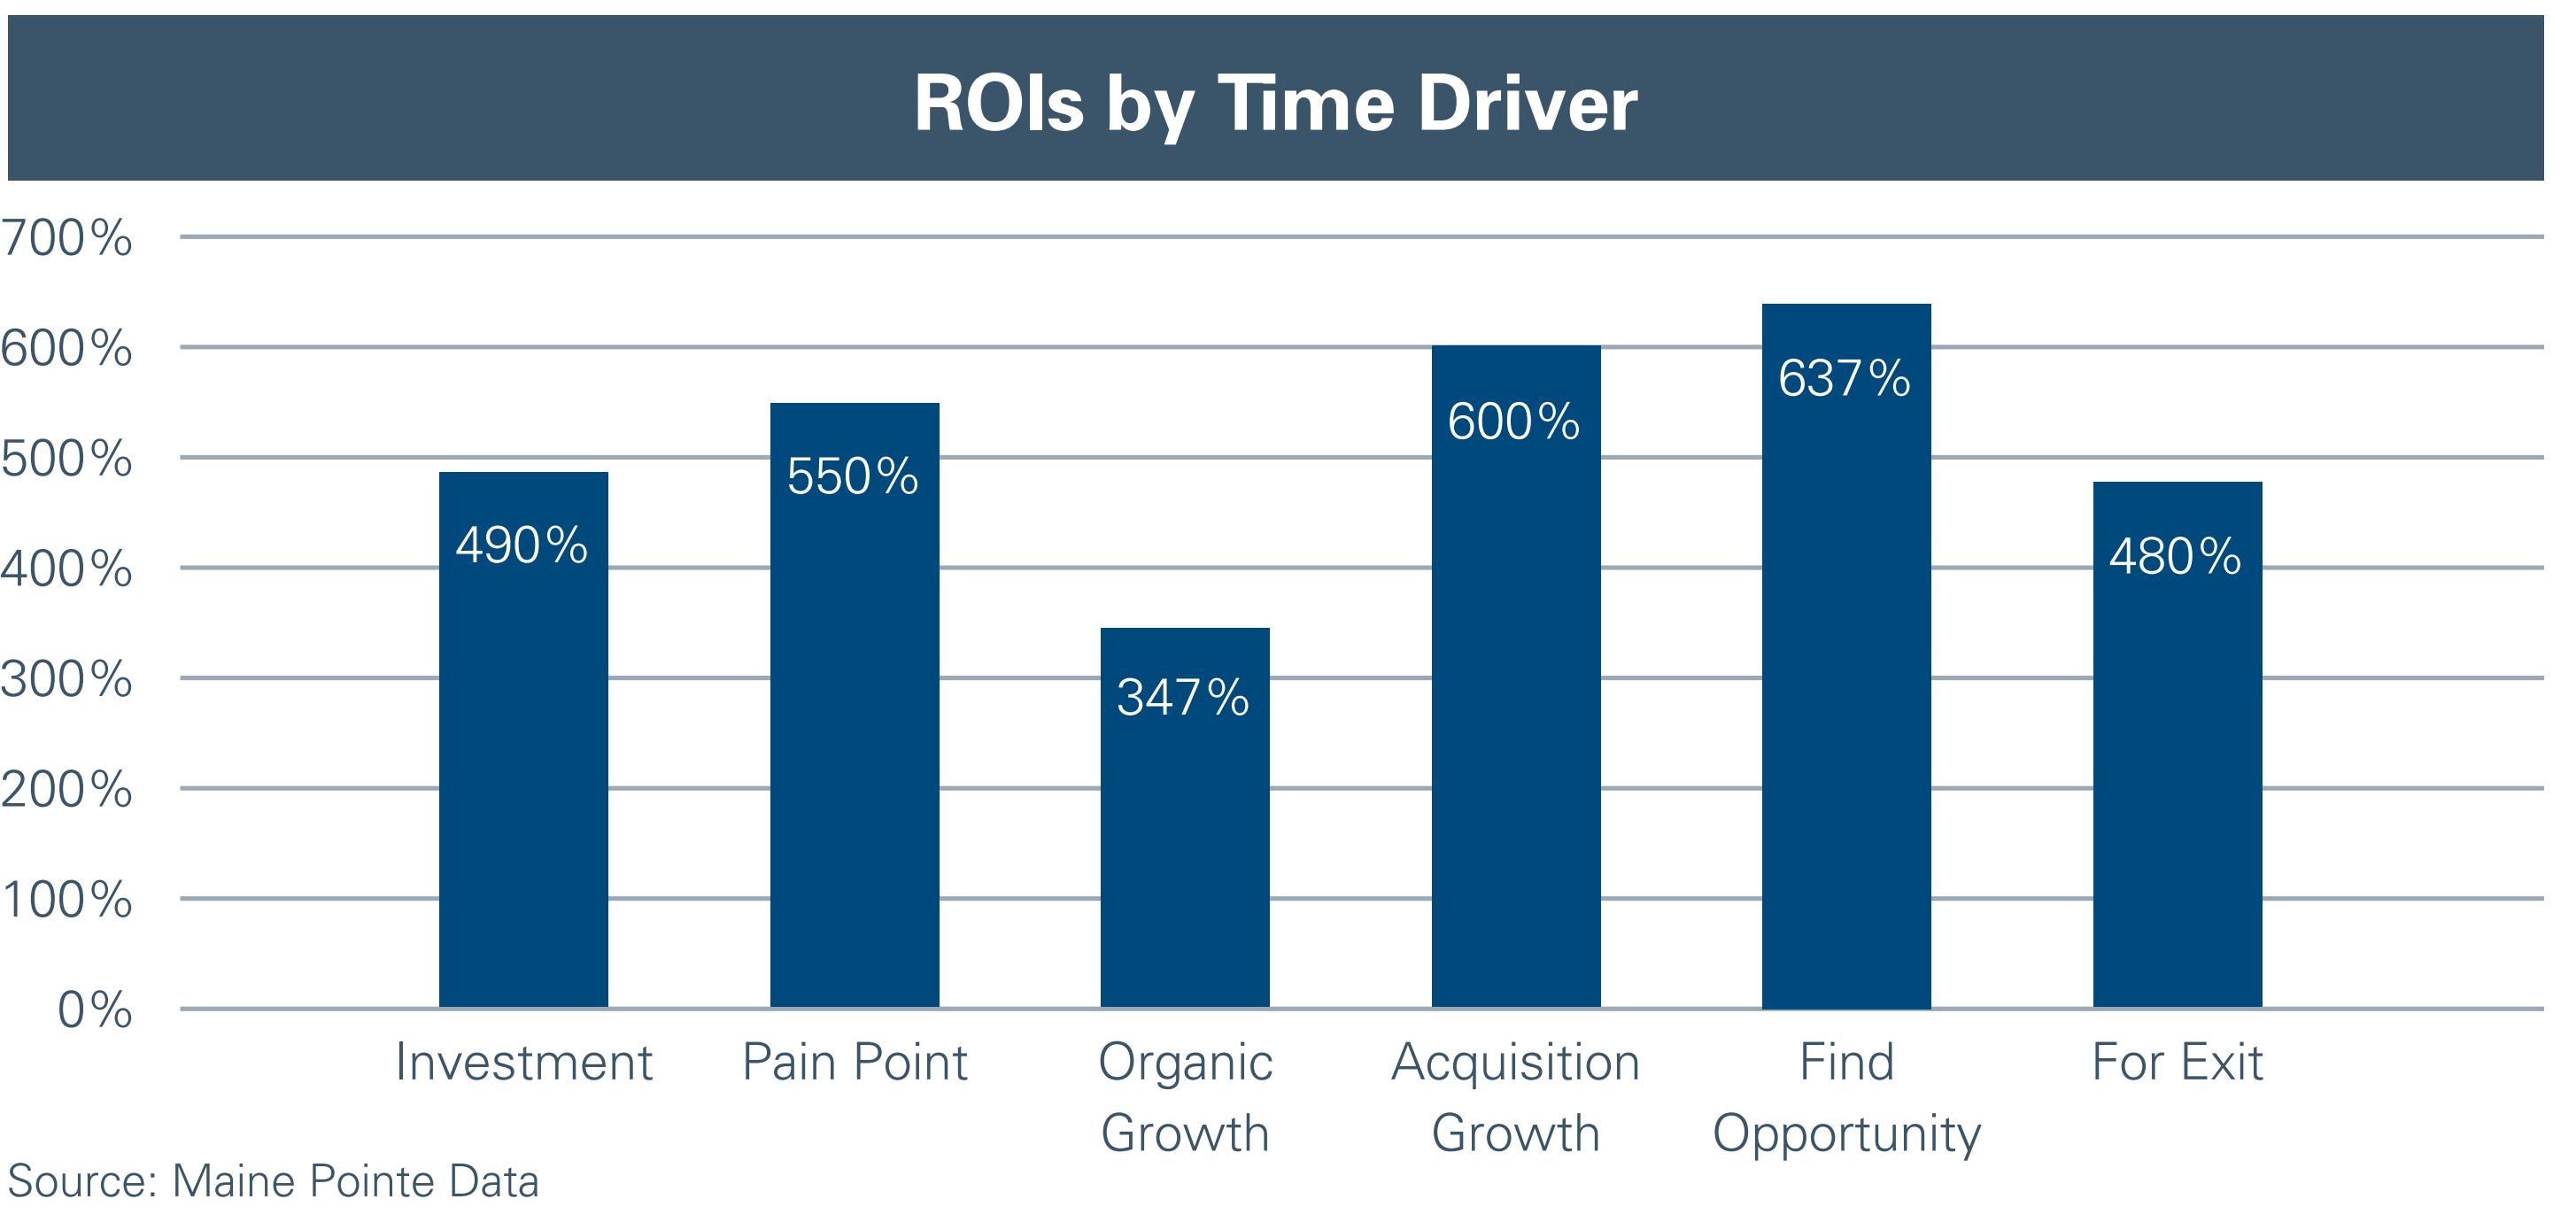 ROIs by Time Driver